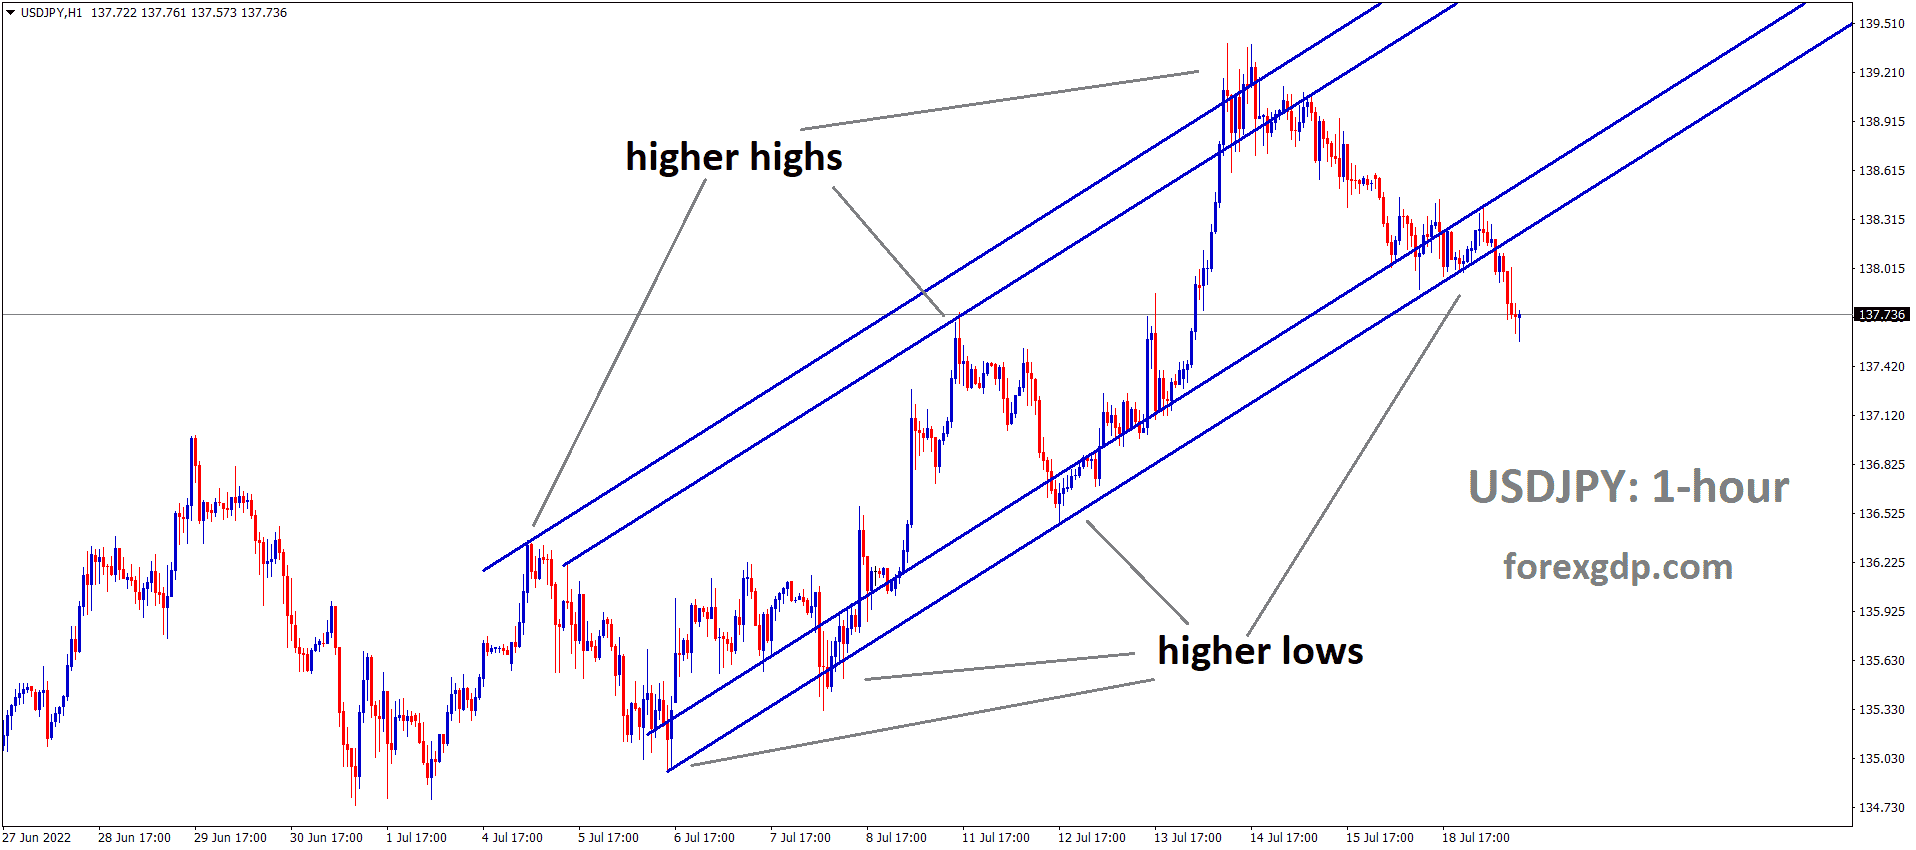 USDJPY is moving in an Ascending channel and the Market has reached the higher low area of the Ascending channel